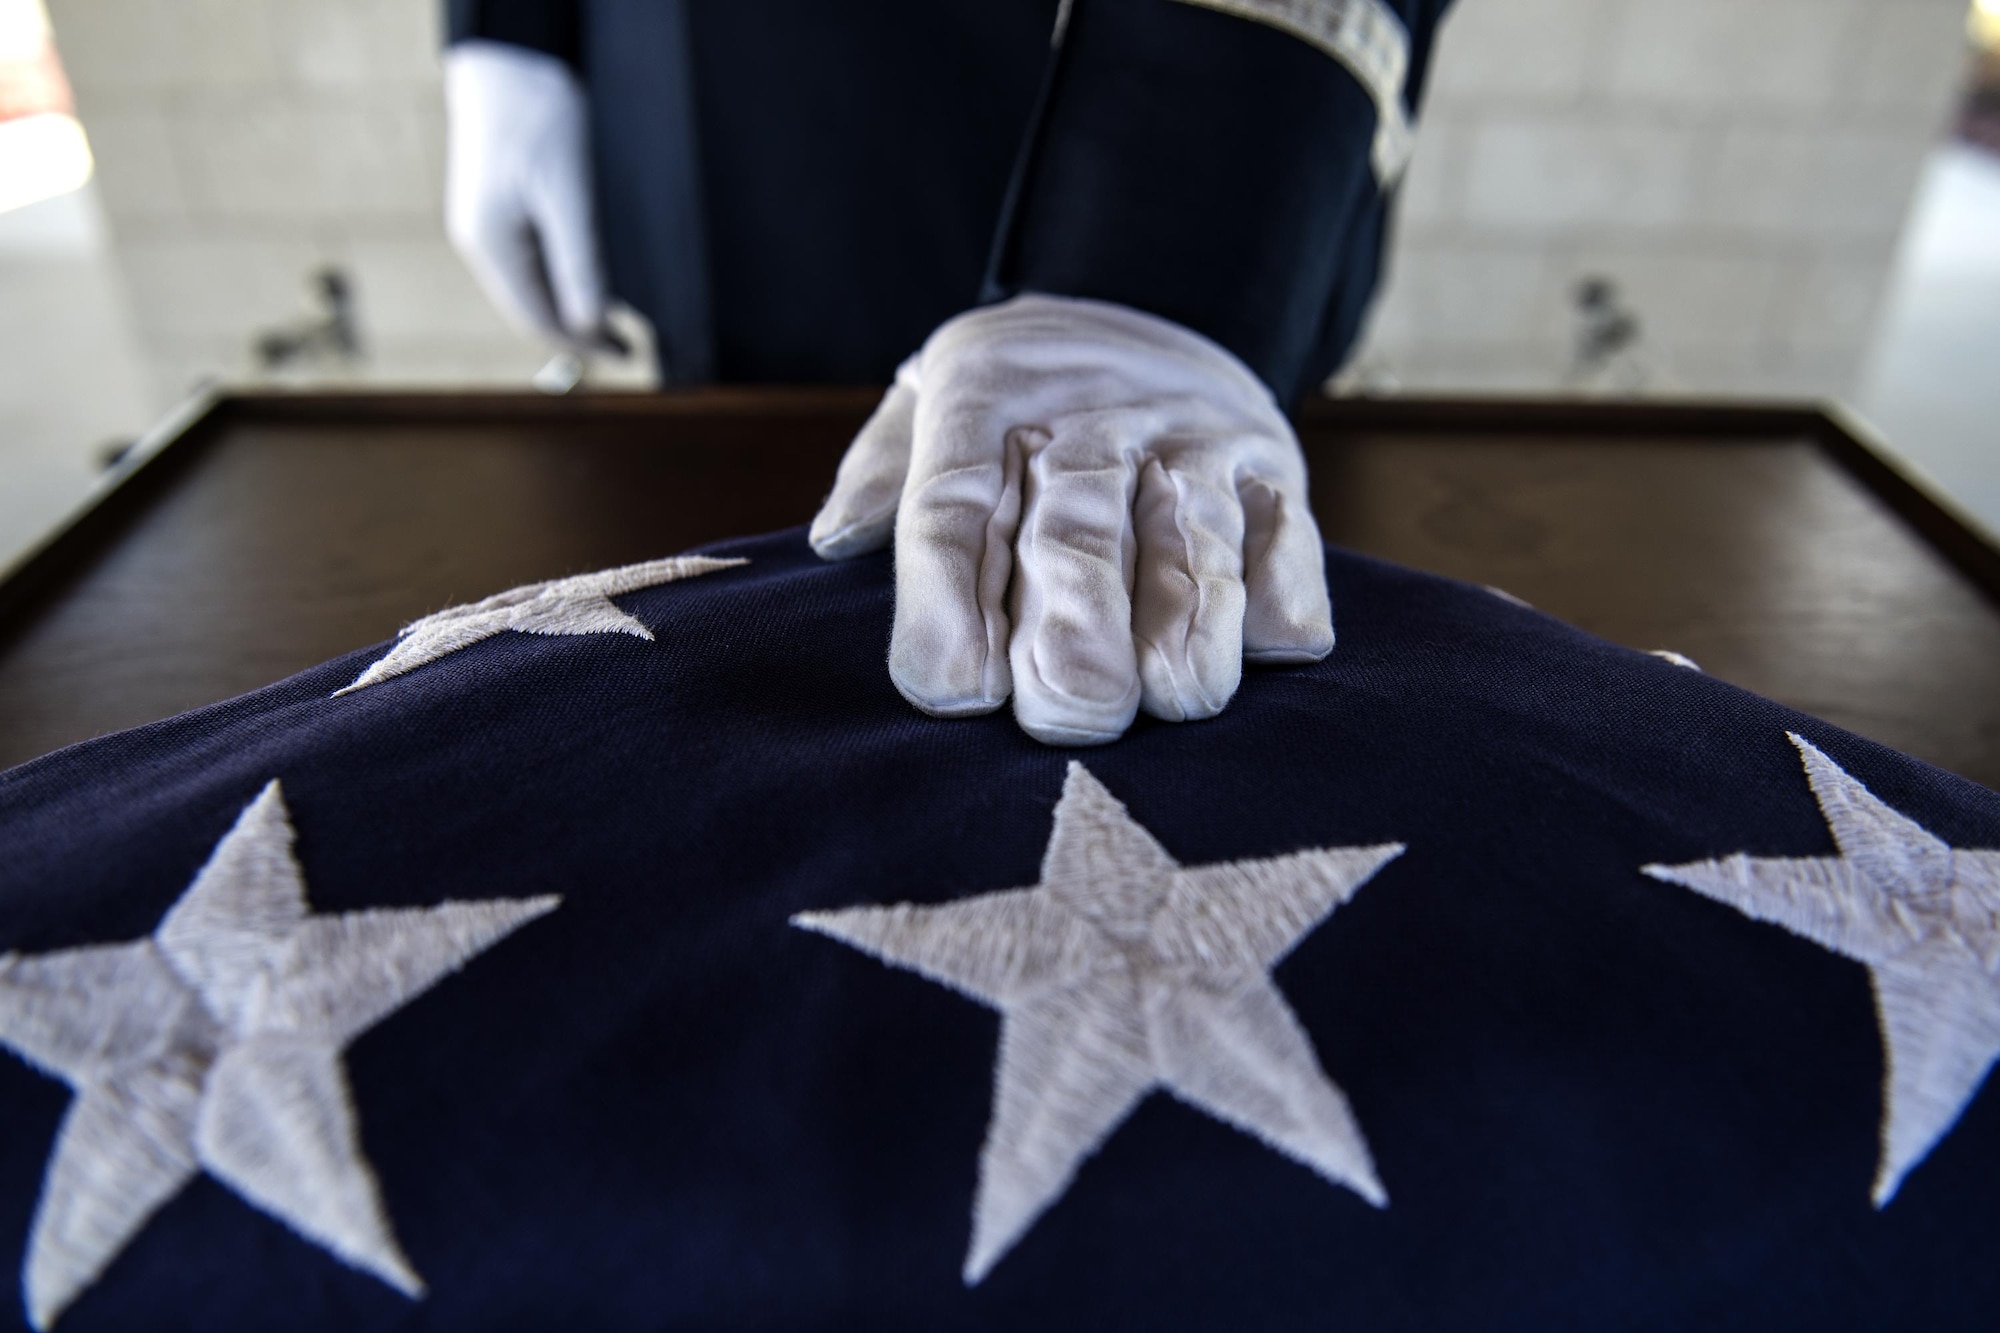 A member of the Moody Air Force Base Honor Guard places a hand on a folded United States flag before a funeral, Oct. 13, 2016, in Jacksonville, Fla. Moody’s honor guard performs congressionally mandated honors throughout 51 counties within Southern Georgia and Northern Florida. (U.S. Air Force photo by Airman 1st Class Janiqua P. Robinson)